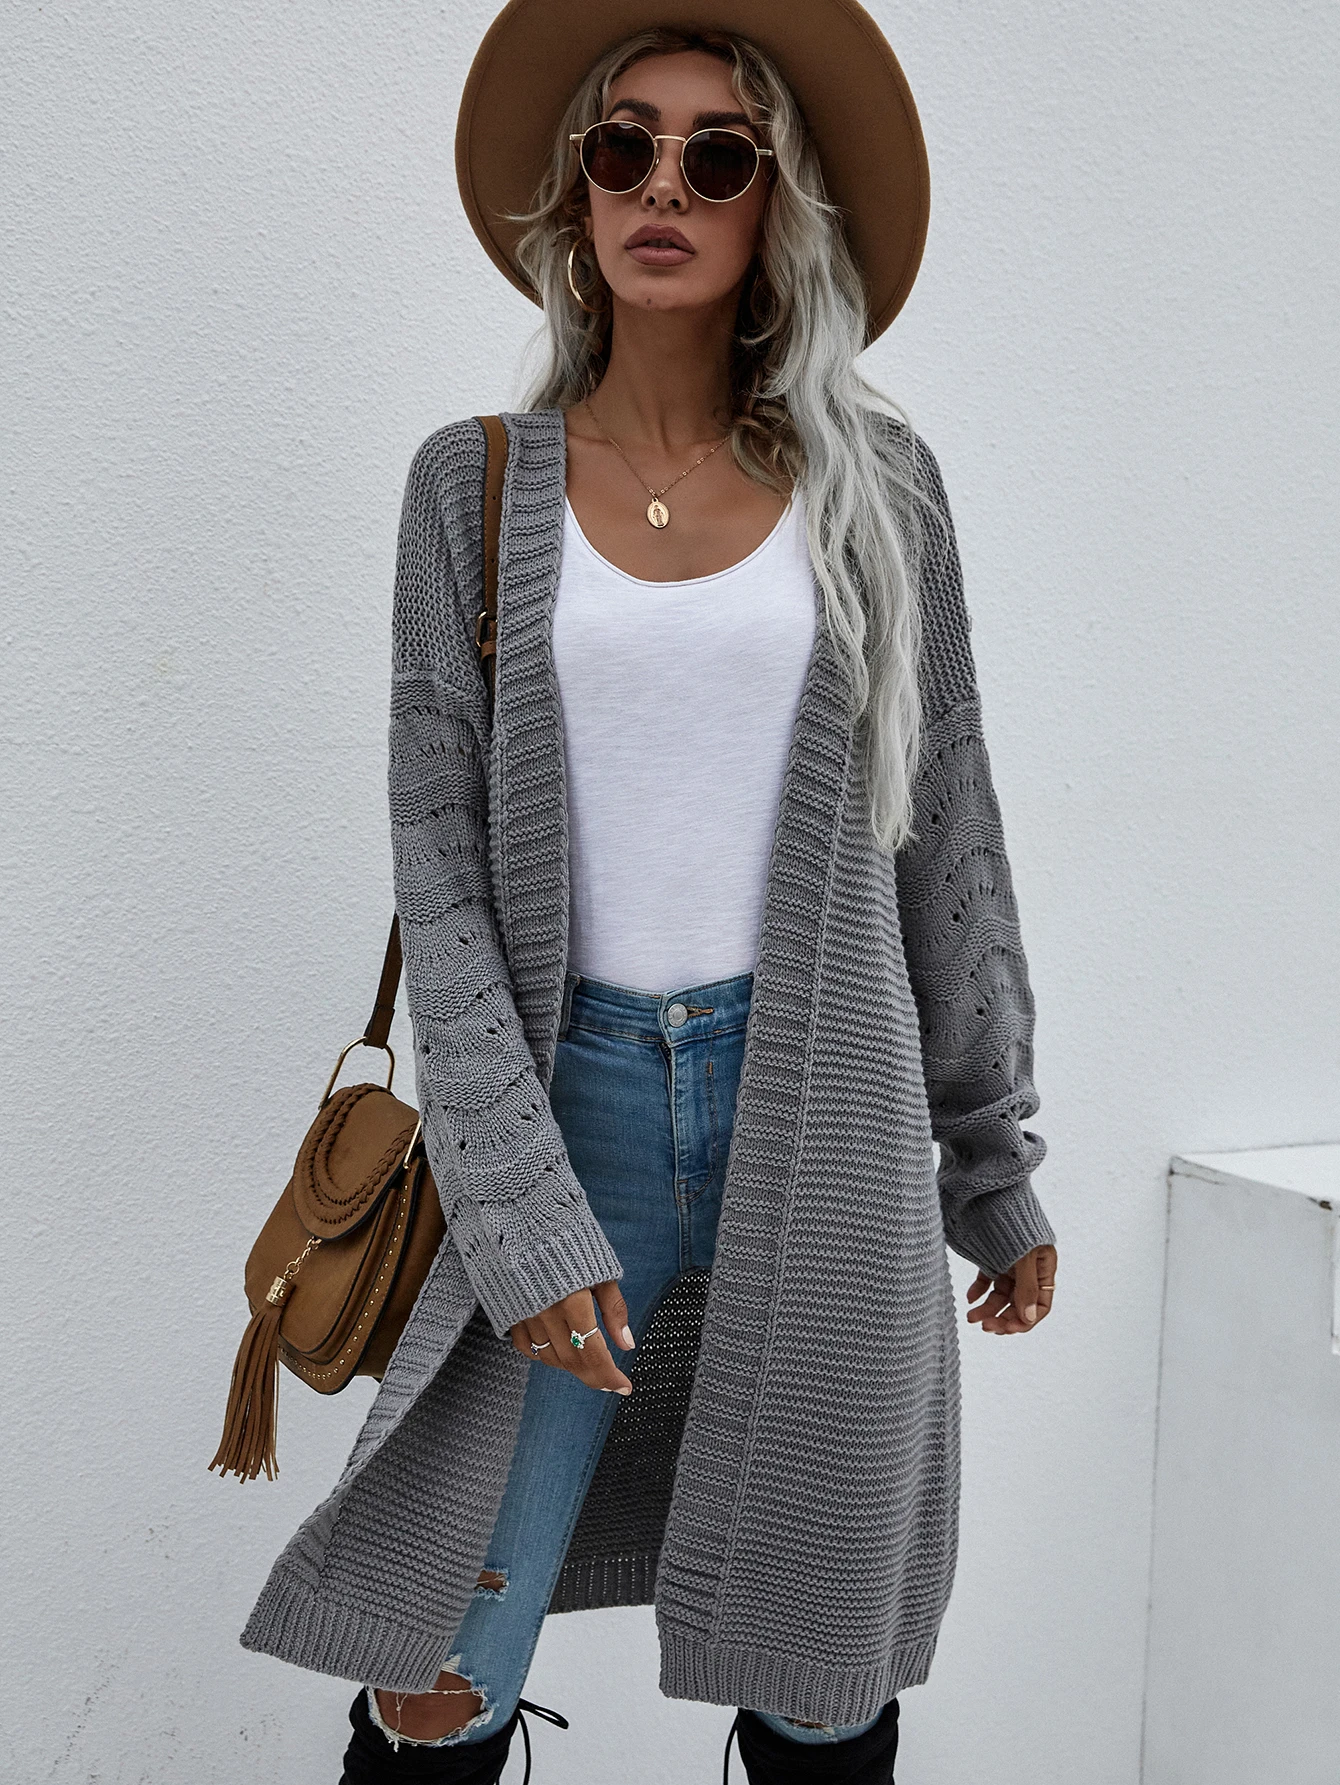 MAYCAUR 2022 Early Spring Long Cardigan Solid Color Women Commuter Loose Knit Women's Fashion Sweater Woman Clothing vintage sweaters